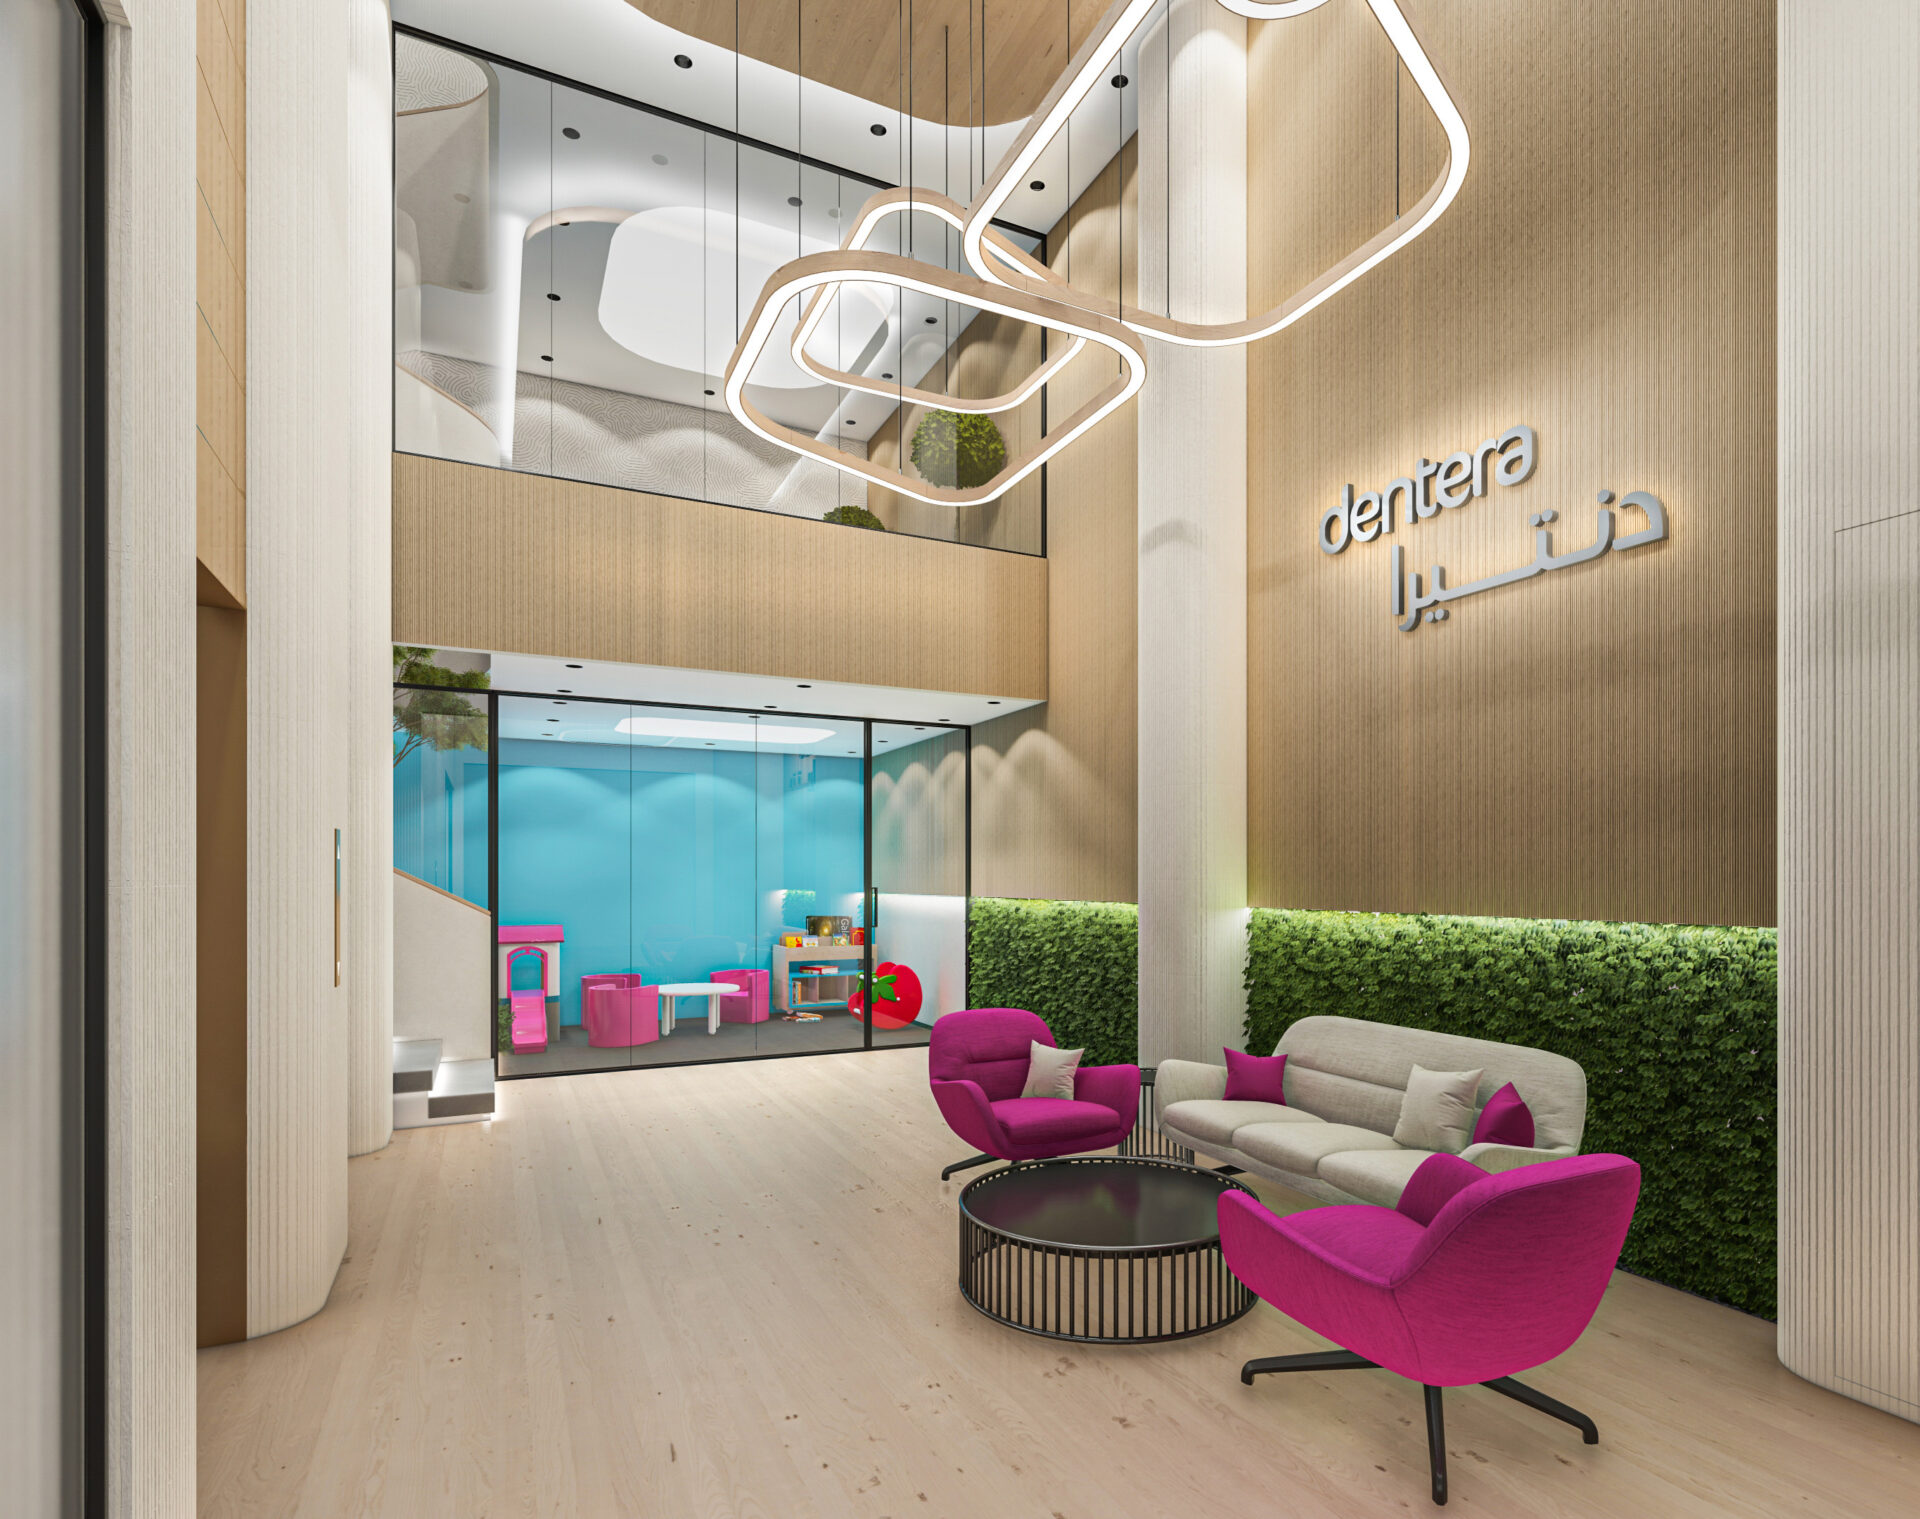 Dentera Clinic by 4Space 03